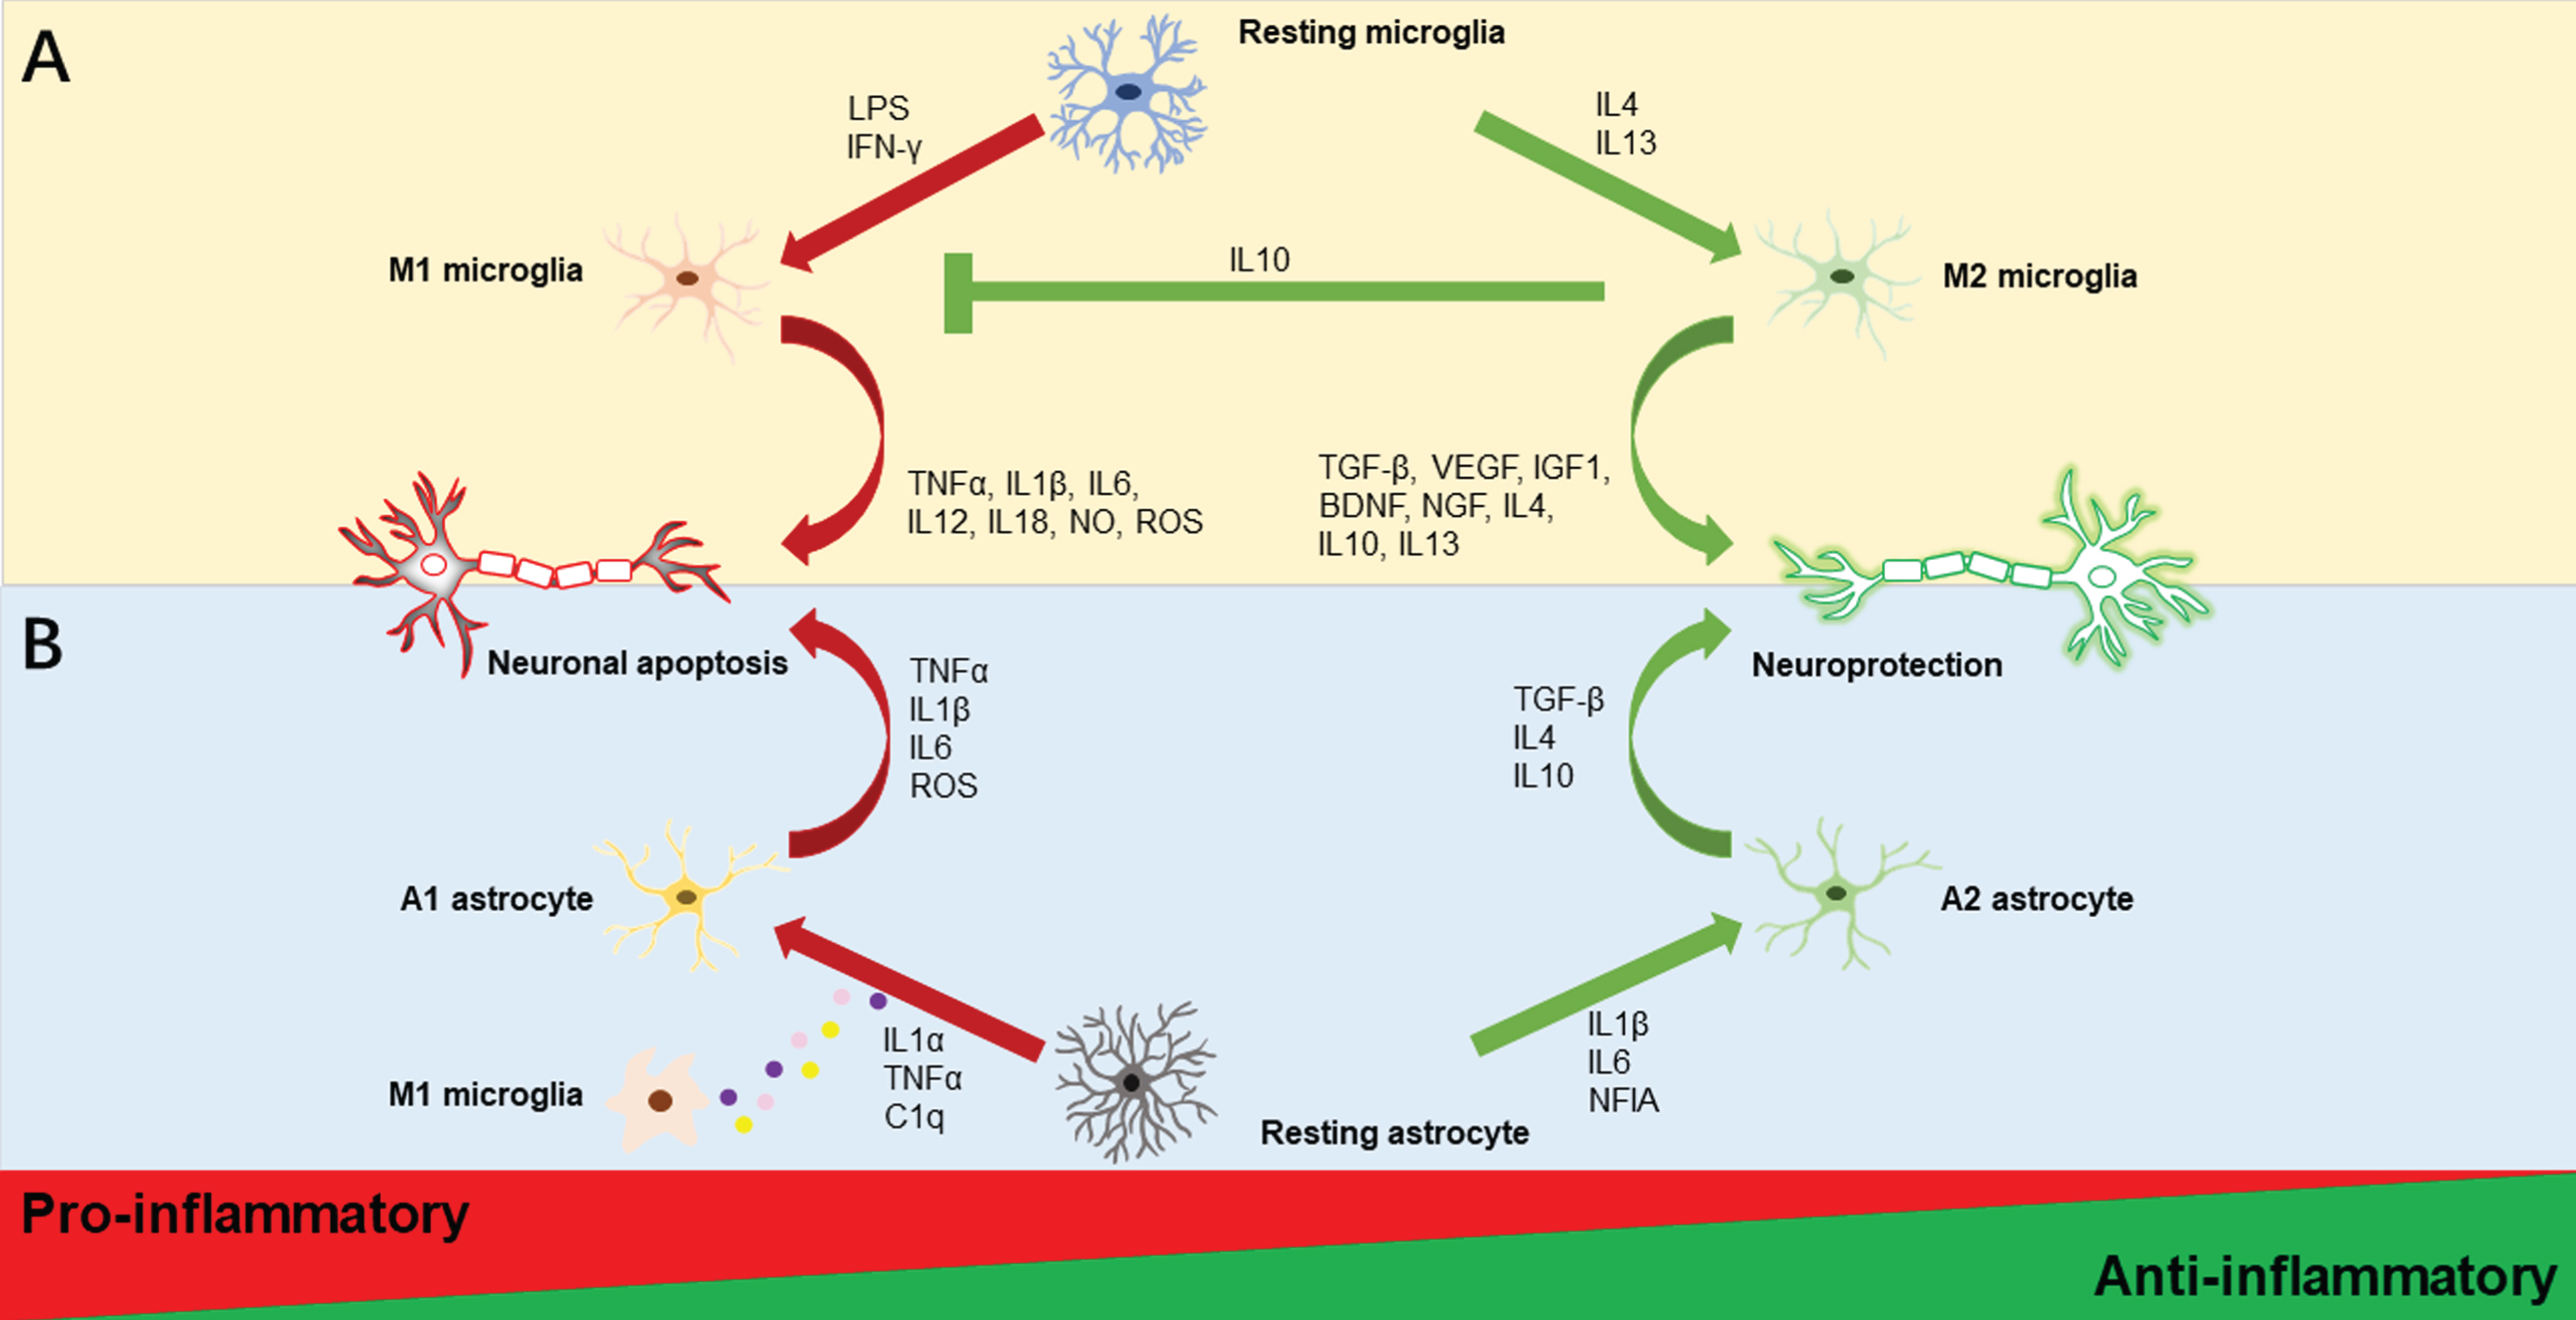 Illustrations of microglia and astrocyte polarization. Activated microglia are often classified as M1 or M2 phenotypes as displayed in the upper half of Fig. 1. Resting microglia polarize to the M1 phenotype and produce pro-inflammatory substances such as TNFα, IL1β, IL6, IL12, IL18, NO, and ROS, when LPS and IFN-γ are present. In contrast, IL4 and IL13 stimulation causes M2 polarization, which increases the secretion of anti-inflammatory substances such as TGF-β, VEGF, IGF1, BDNF, NGF, IL4, IL10, and IL13. Additionally, M2 microglia could promote the inhibition of M1 microglia by the anti-inflammatory cytokine IL10. Activated astrocytes are usually divided into A1 and A2 phenotypes as depicted in the lower half of Figure 1. Astrocytes may transform into different reactive astrocyte phenotypes depending on the stimulus. The M1 microglia’s production of the pro-inflammatory cytokines IL1α, TNFα, and C1q causes the A1 neurotoxic phenotype and encourages the secretion of TNFα, IL1β, IL6, and ROS. Meanwhile, IL1β, IL6, and NFIA trigger the A2 phenotypic change with neuroprotective effects that increase anti-inflammatory molecules TGF-β, IL4, and IL10. BDNF, brain-derived neurotrophic factor; C1q, complement component 1q; IFN-γ, interferon-gamma; IGF1, insulin-like growth factor 1; IL, interleukin; LPS, lipopolysaccharide; NFIA, nuclear factor IA; NGF, nerve growth factor; NO, nitric oxide; ROS, reactive oxygen species; TGF-β, transforming growth factor-beta 1; TNF-α, tumor necrosis factor-alpha; VEGF, vascular endothelial growth factor.